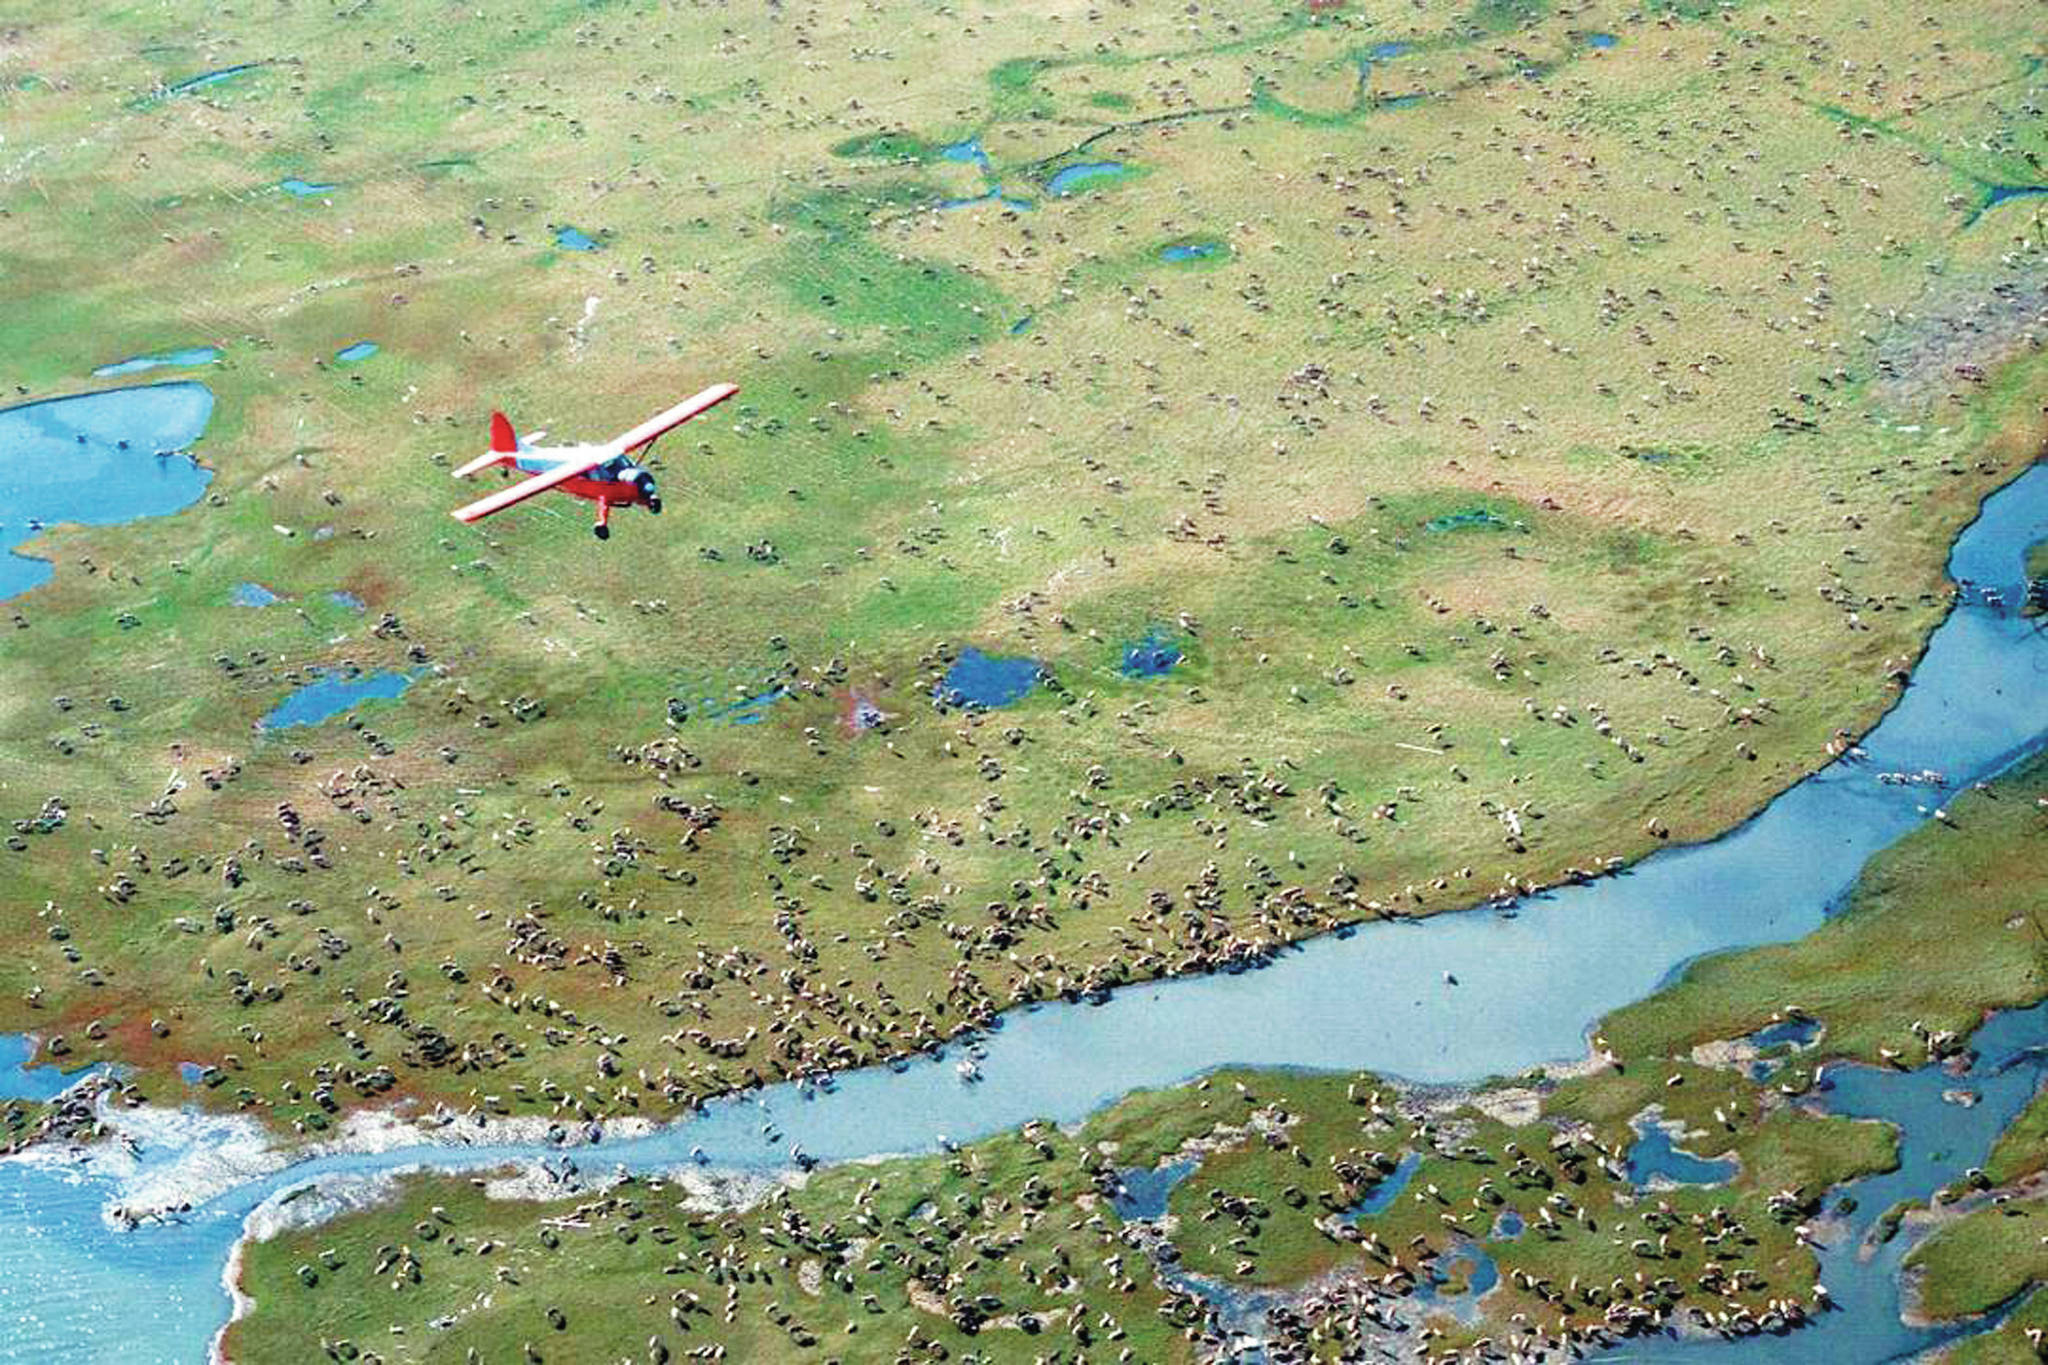 In this undated photo provided by the U.S. Fish and Wildlife Service, an airplane flies over caribou from the Porcupine Caribou Herd on the coastal plain of the Arctic National Wildlife Refuge in northeast Alaska.The Department of the Interior has approved an oil and gas leasing program within Alaska’s Arctic National Wildlife Refuge. The refuge is home to polar bears, caribou and other wildlife. Secretary of the Interior David Bernhardt signed the Record of Decision, which will determine where oil and gas leasing will take place in the refuge’s coastal plain. (U.S. Fish and Wildlife Service via AP)